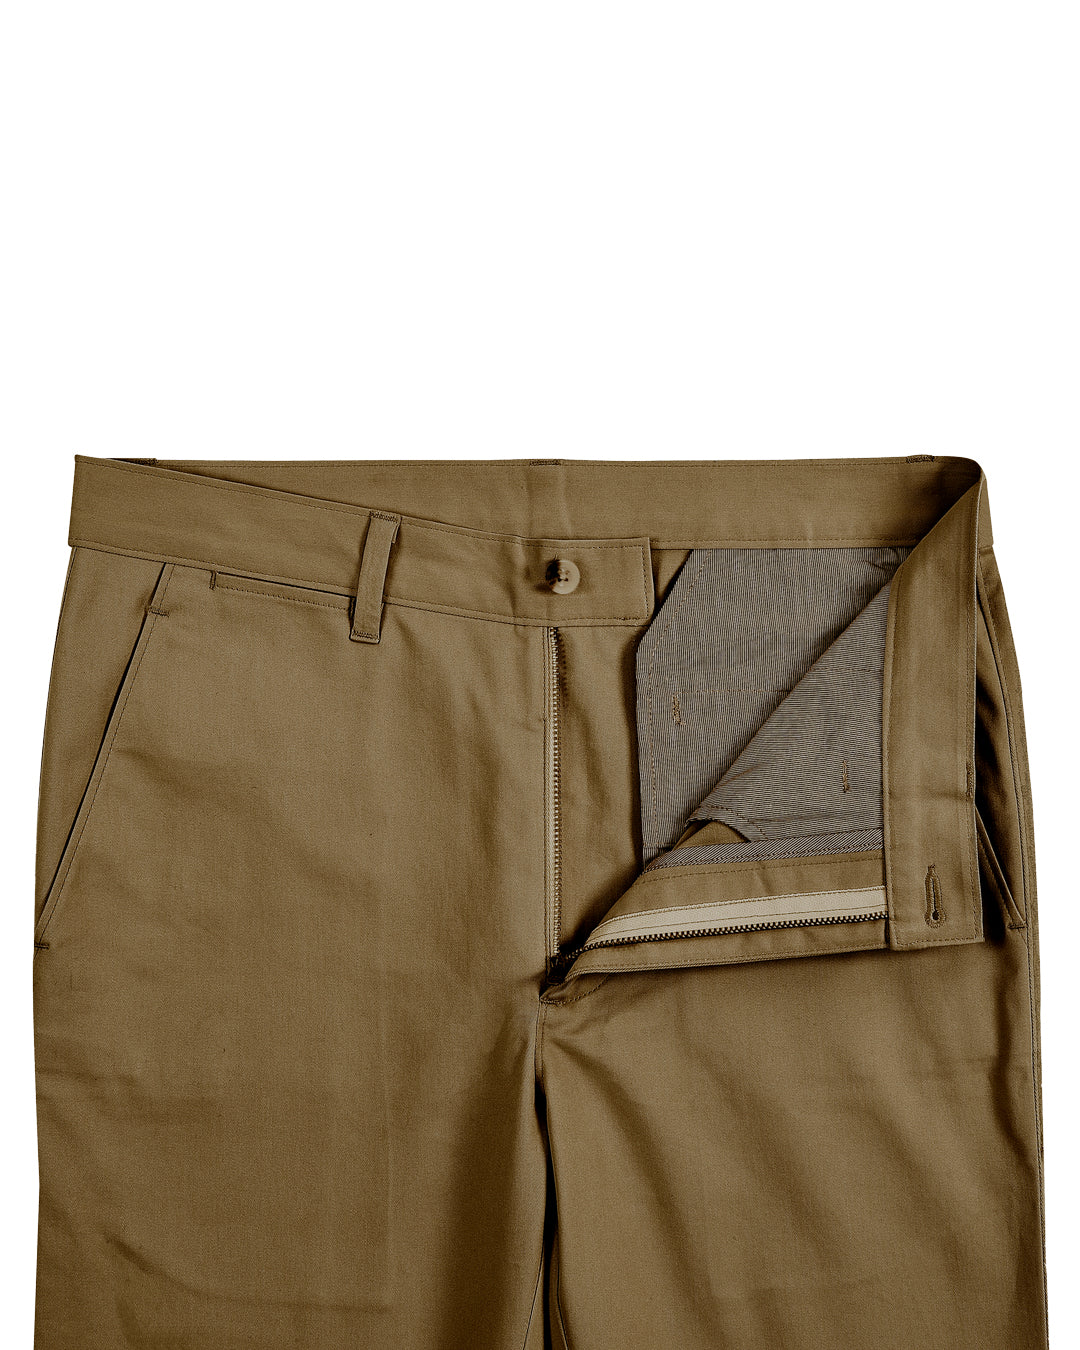 Front open view of custom Genoa Chino pants for men by Luxire in copper